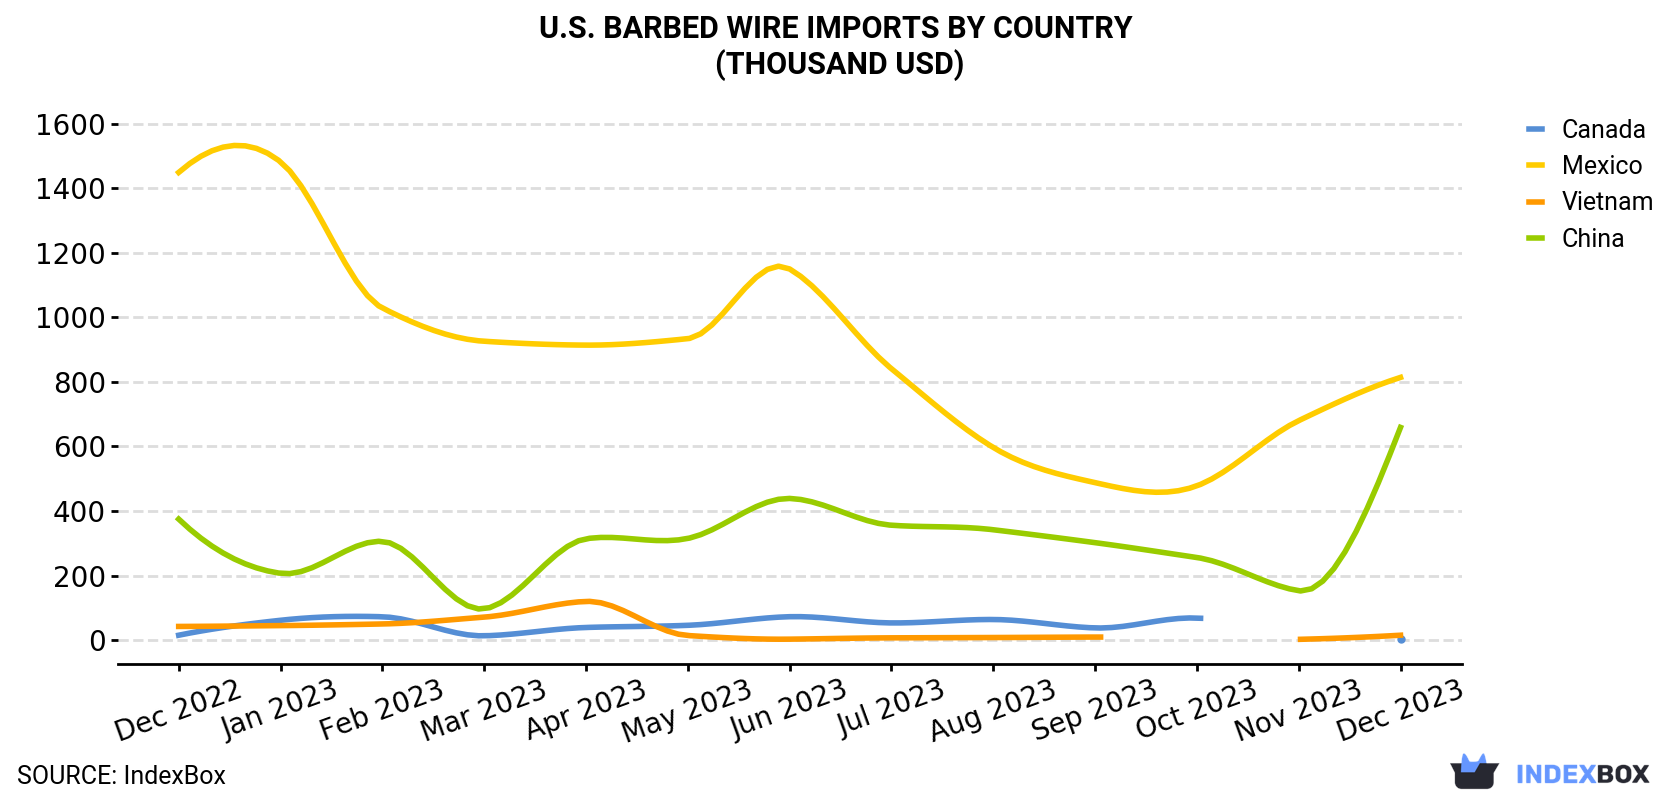 U.S. Barbed Wire Imports By Country (Thousand USD)